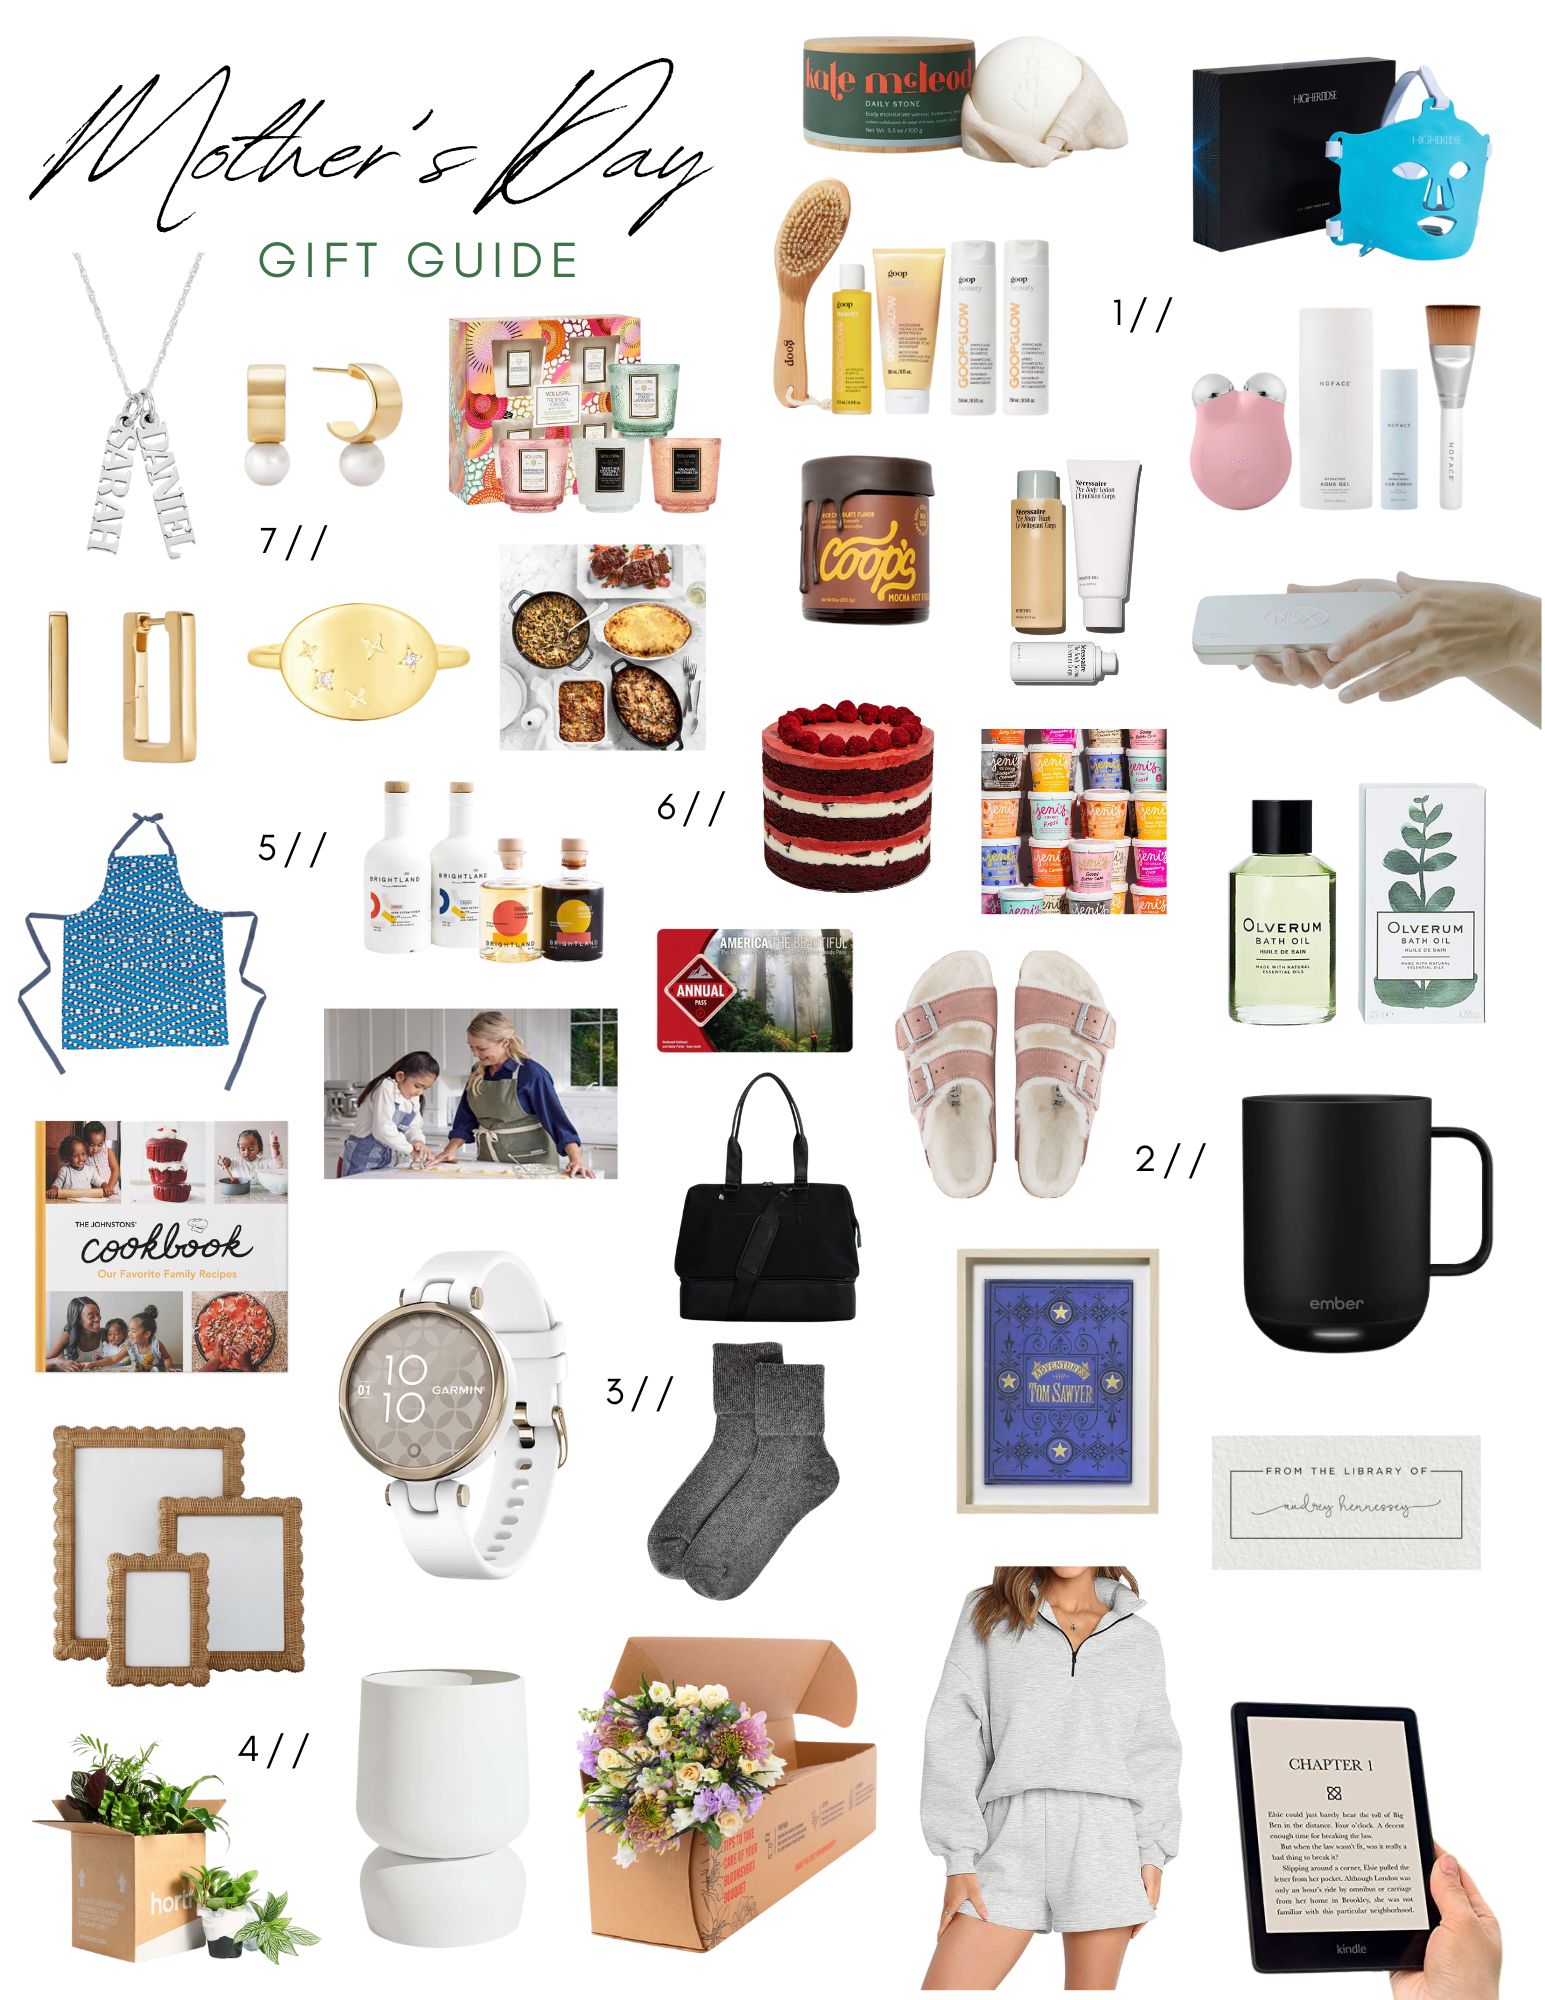 A round-up of mother's day gift ideas that are perfect for any mom!